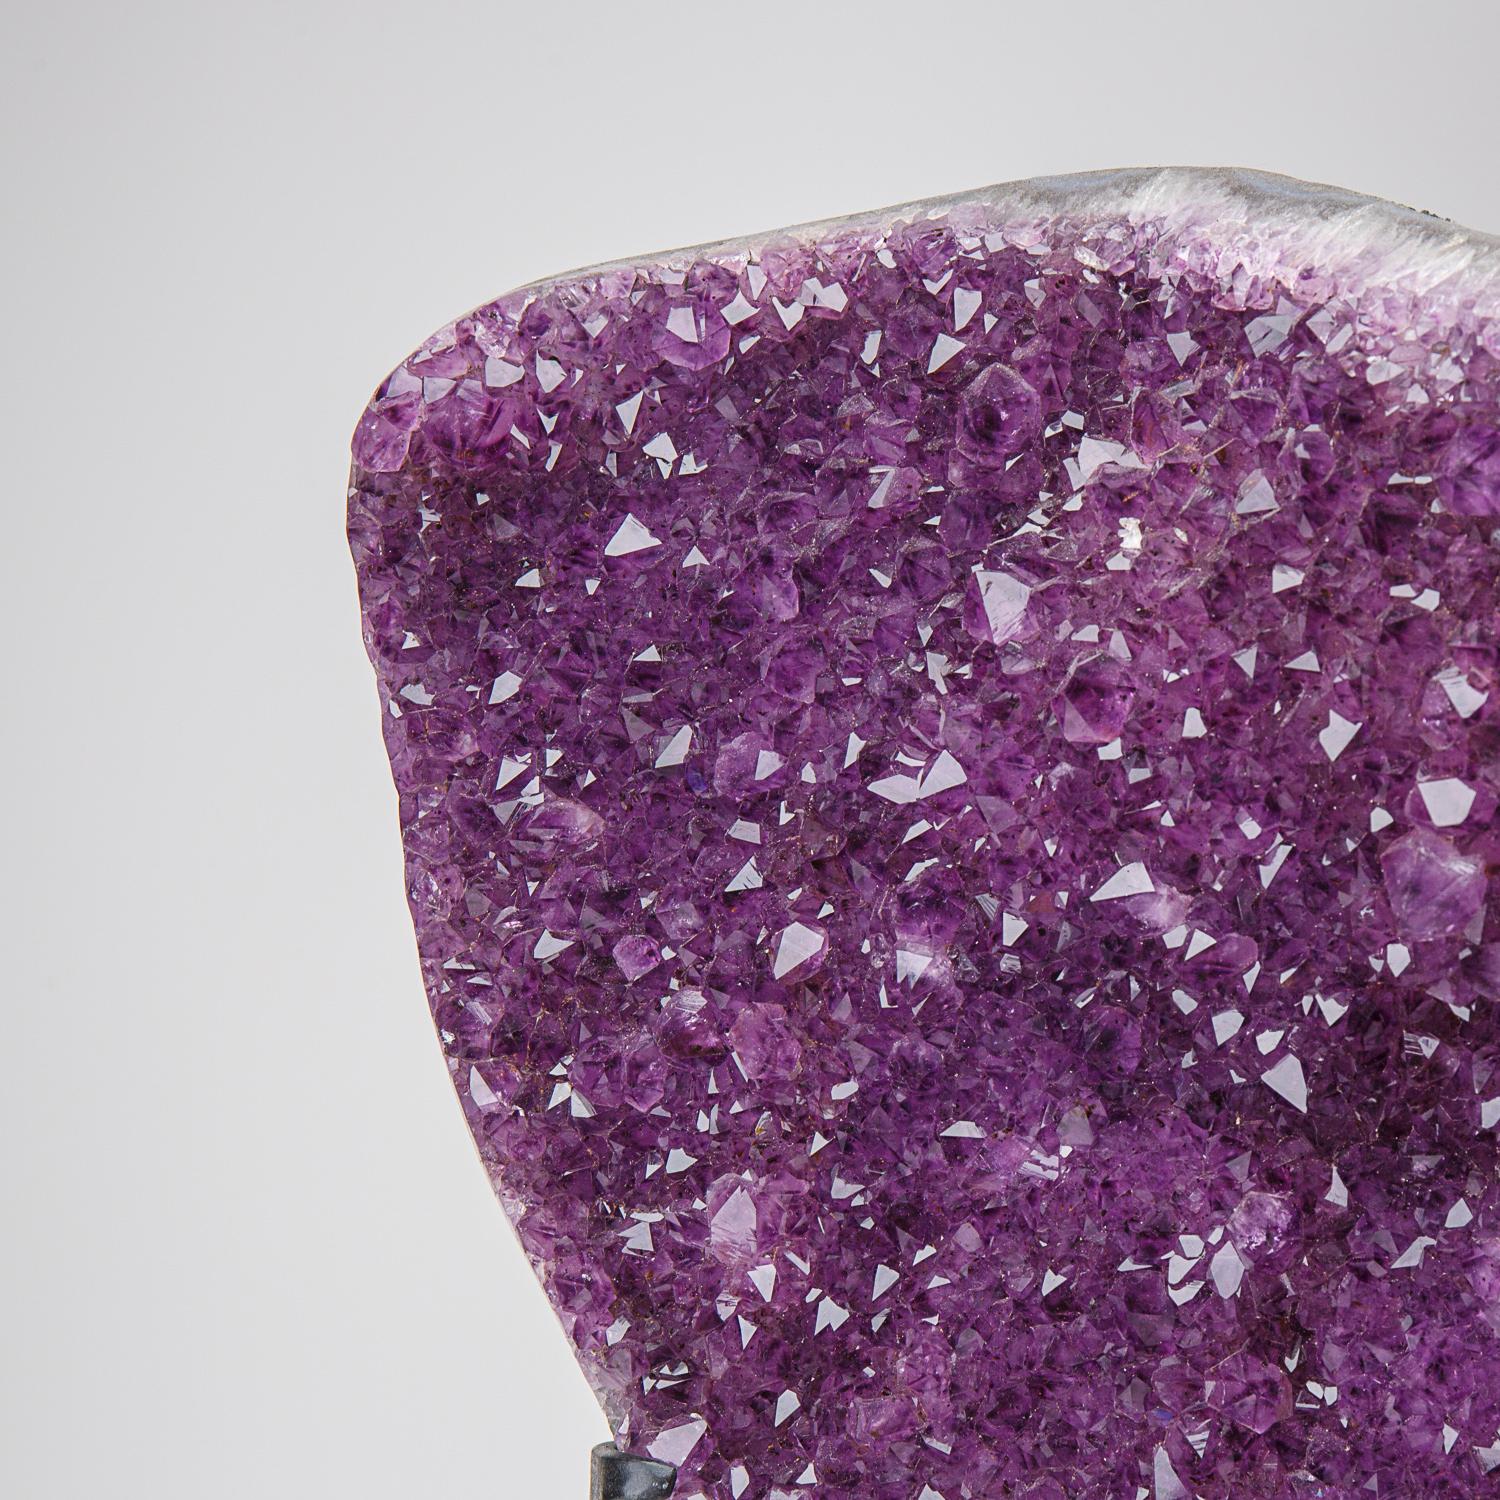 Contemporary Genuine Amethyst Crystal Cluster on Stand from Brazil (32.5 lbs) For Sale